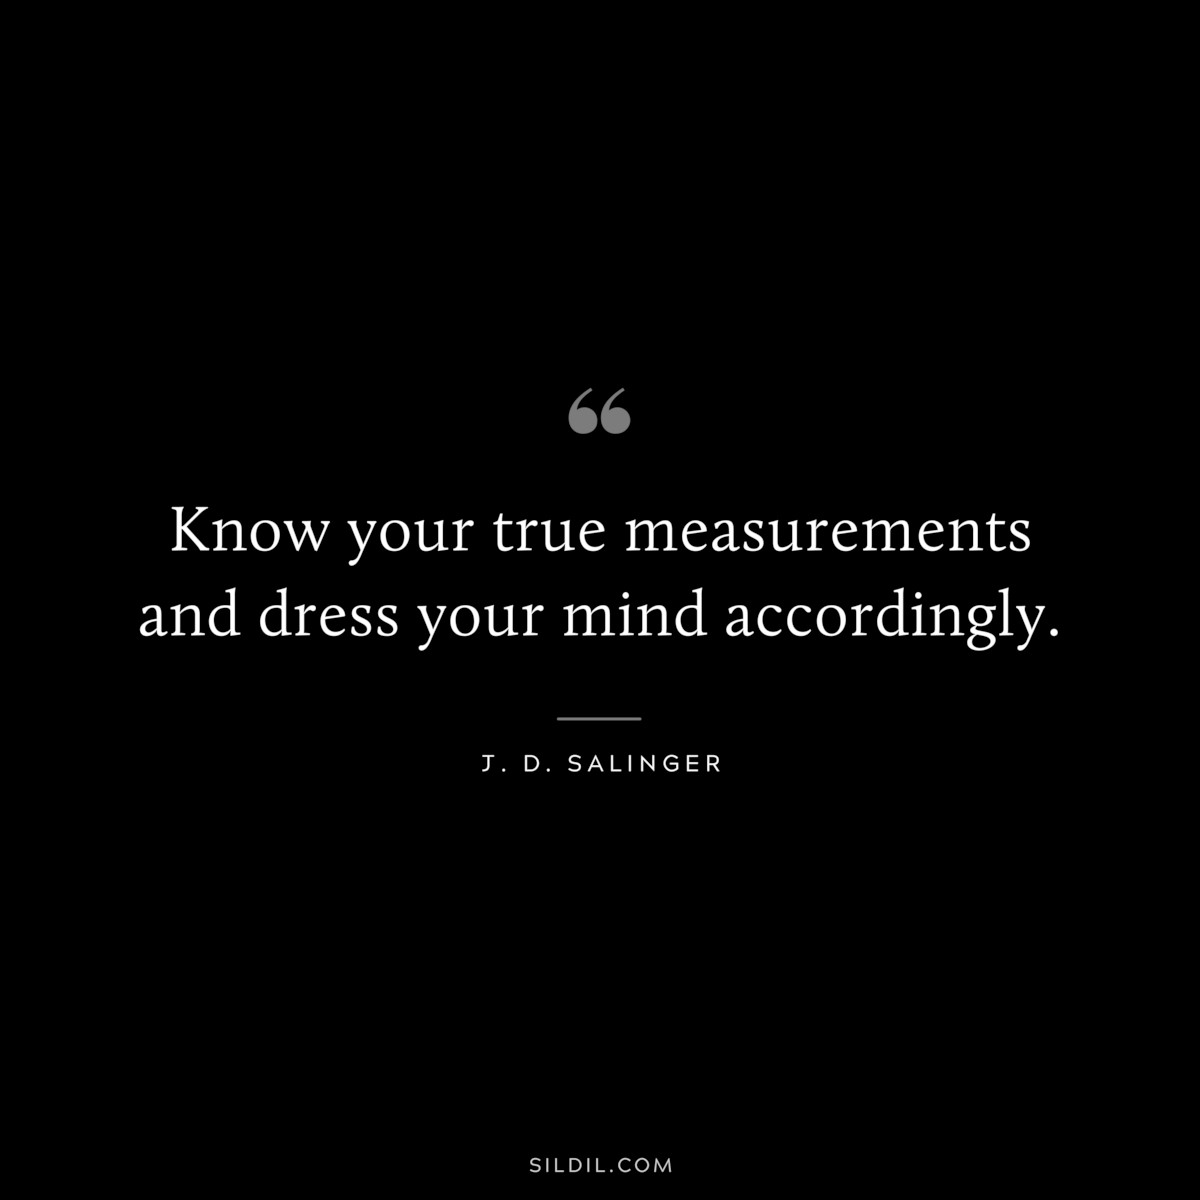 Know your true measurements and dress your mind accordingly. — J. D. Salinger